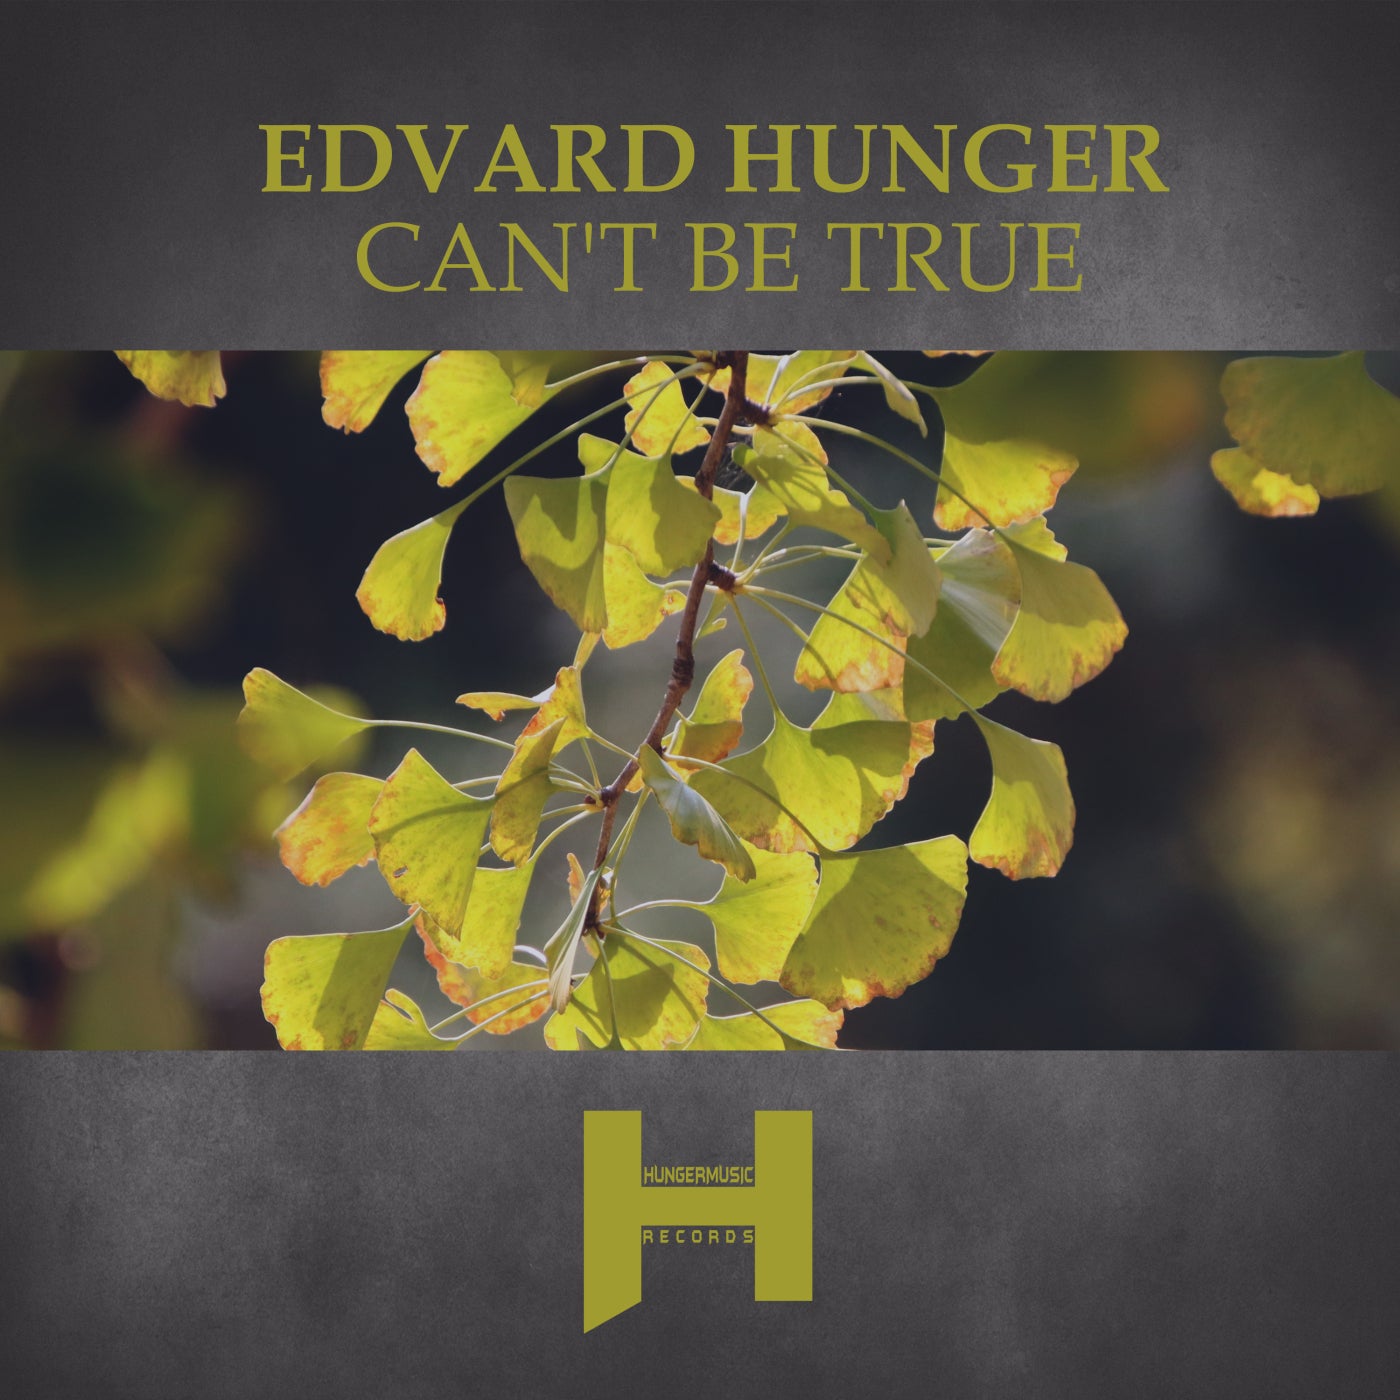 Edvard Hunger - Can't Be True [Hungermusic Records]